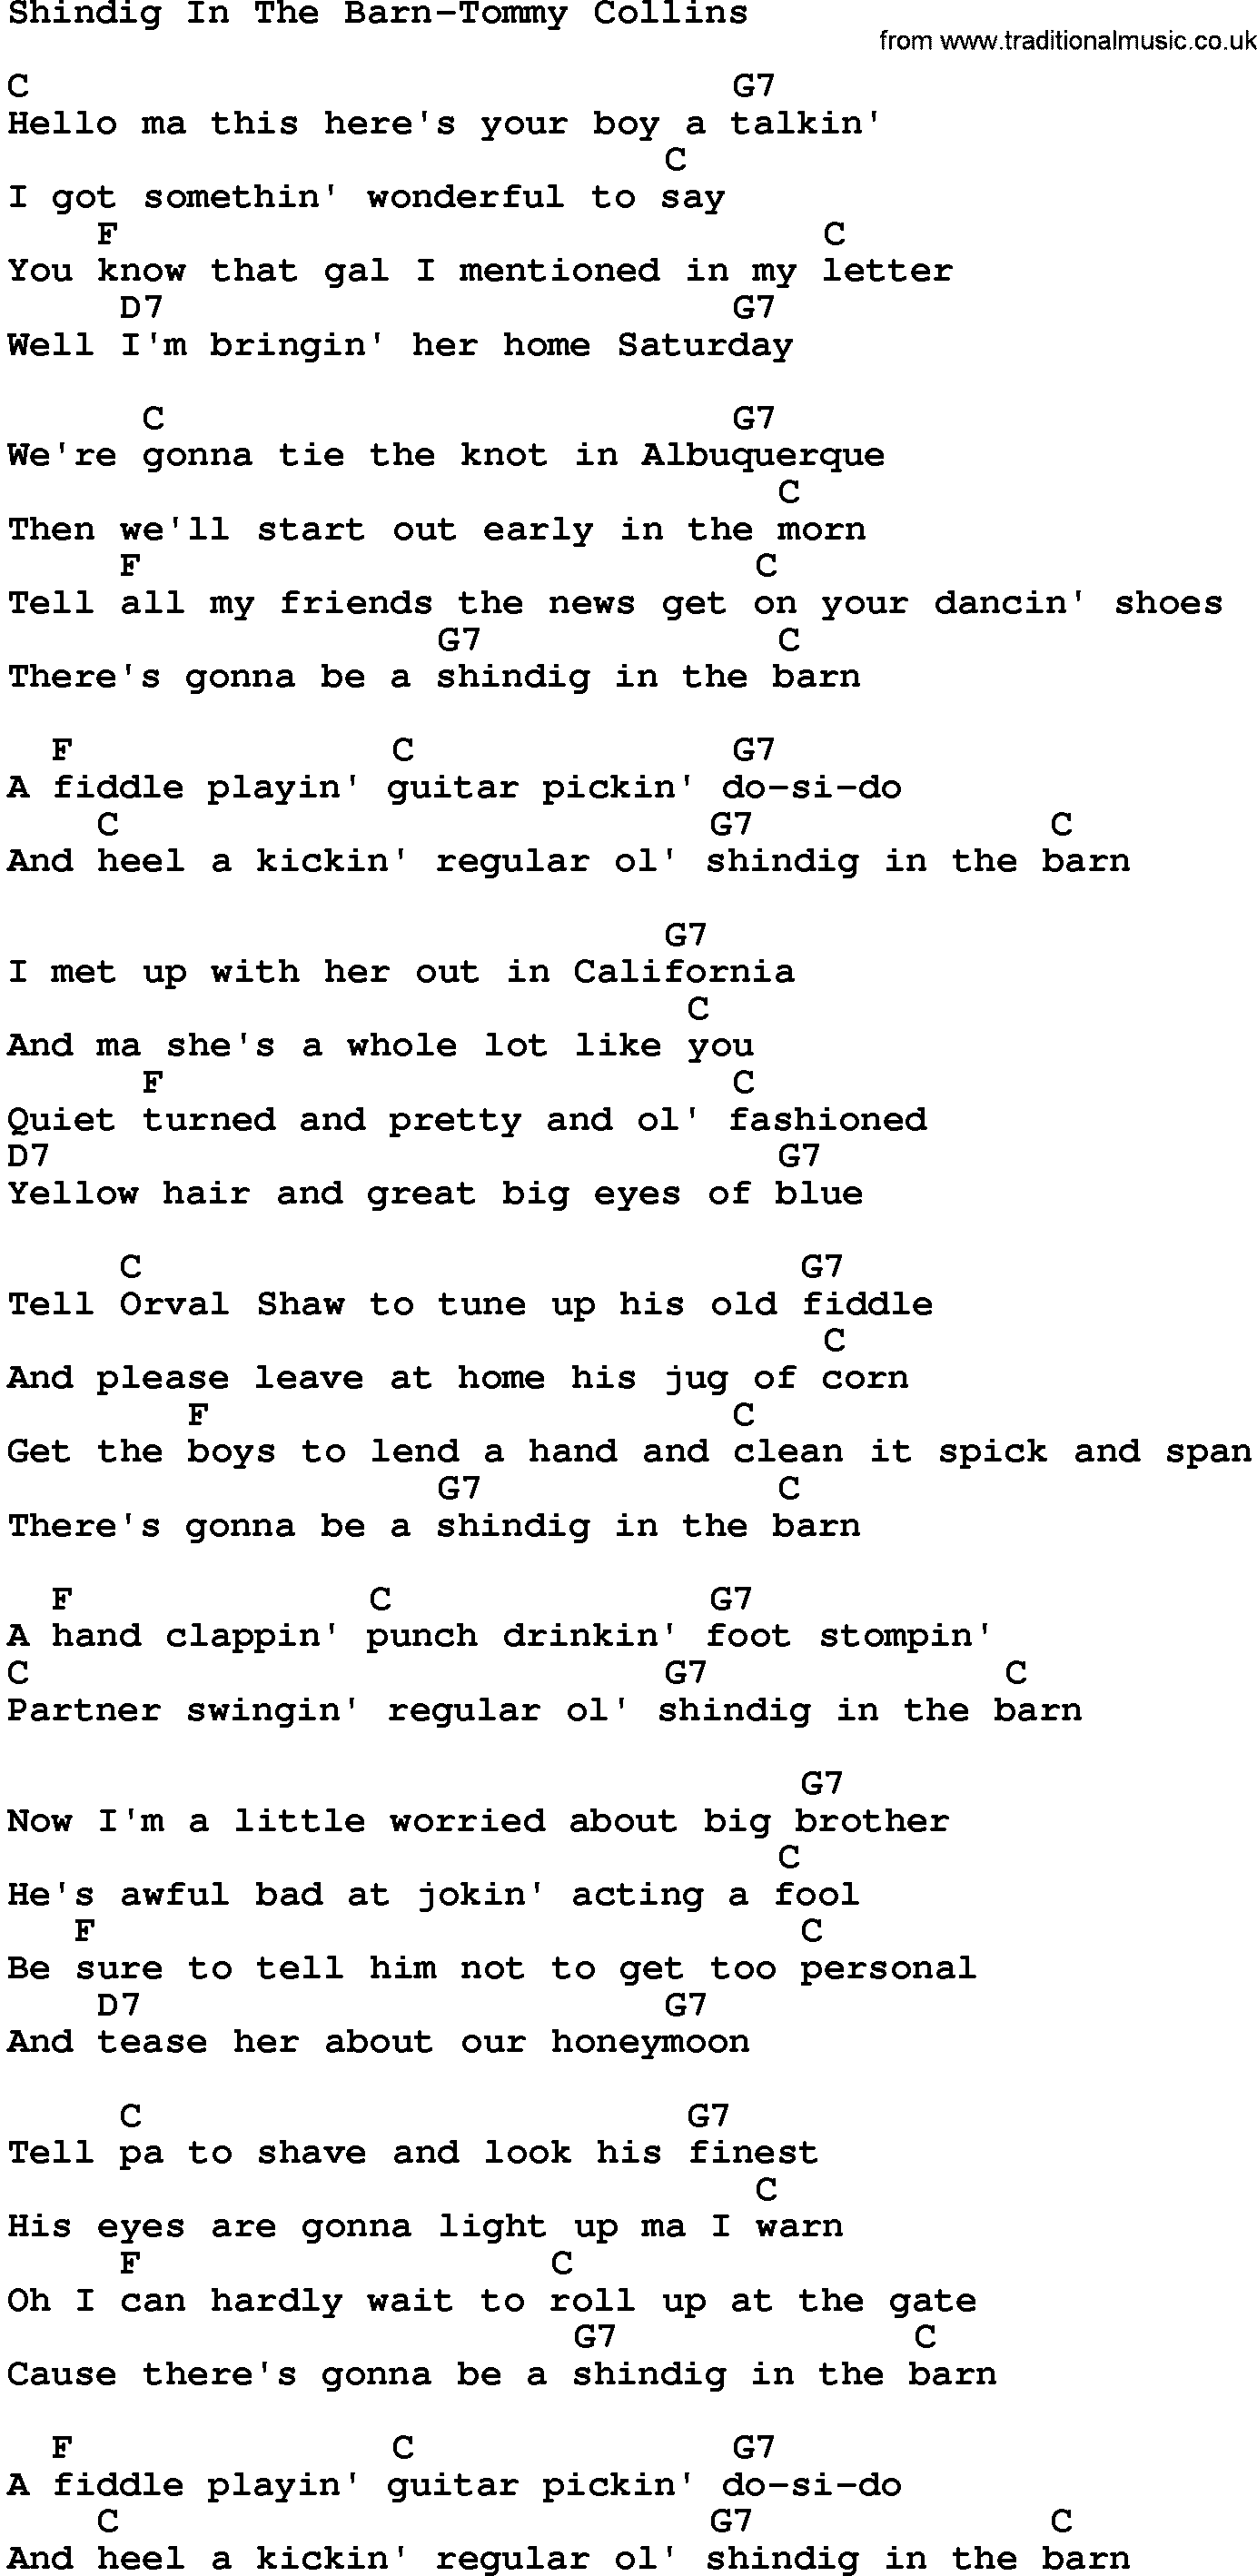 Country music song: Shindig In The Barn-Tommy Collins lyrics and chords